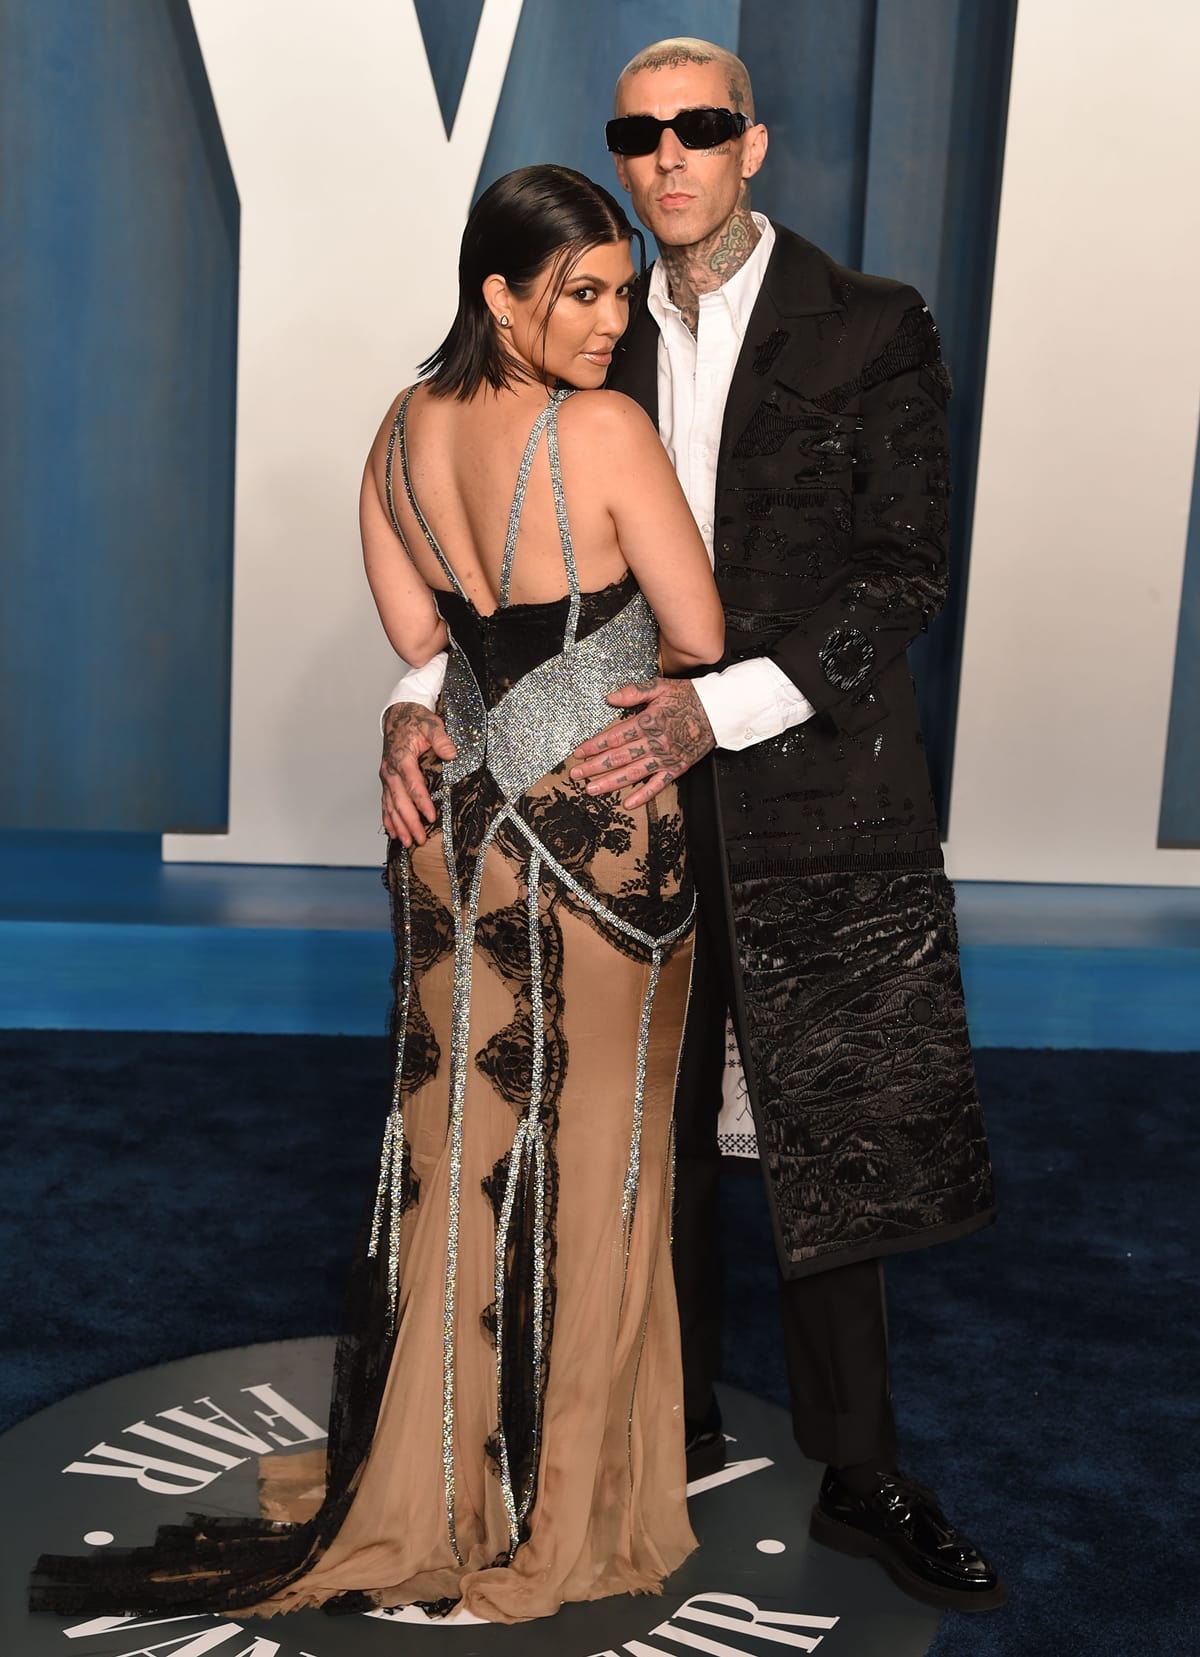 Kourtney Kardashian in a vintage Dolce & Gabbana dress and Travis Barker in a Thom Browne ensemble at the 2022 Vanity Fair Oscar Party